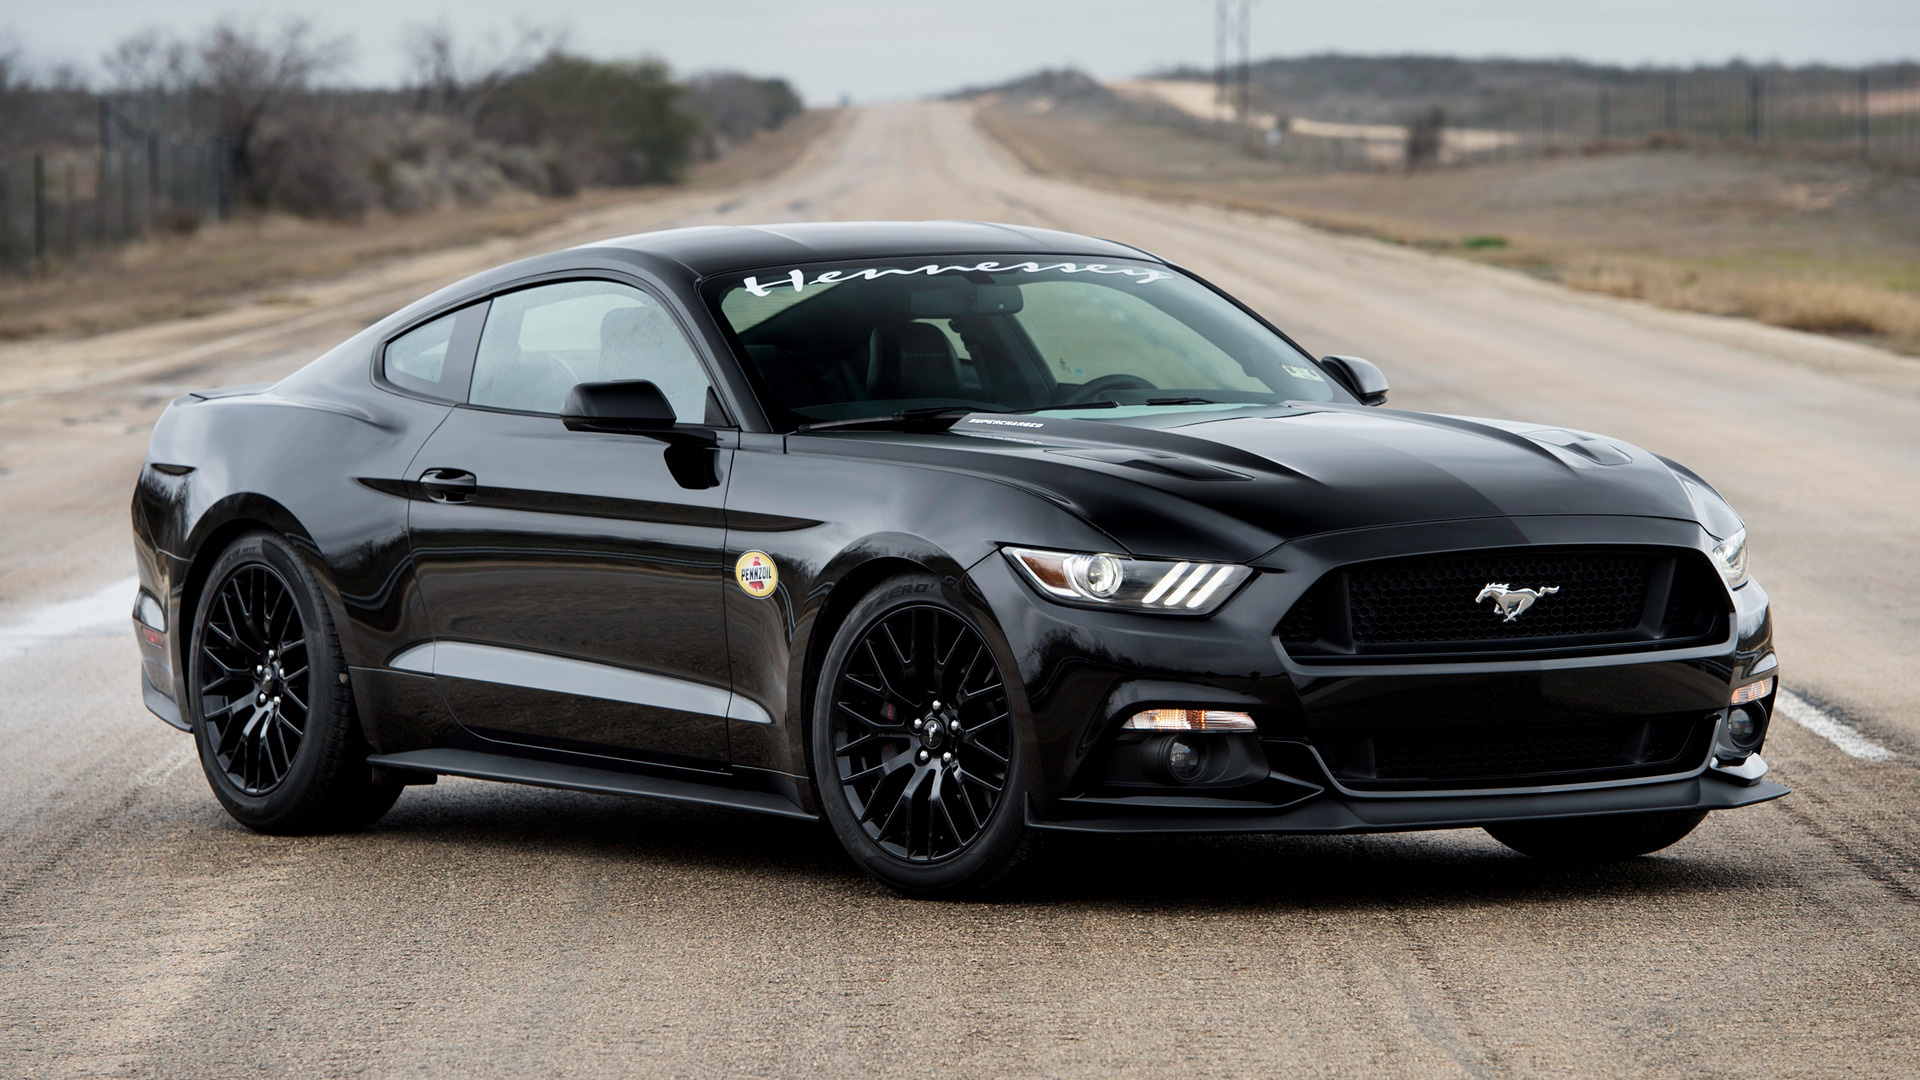 Mustang Of The Day: 2015 Hennessey Mustang GT HPE700 Supercharged